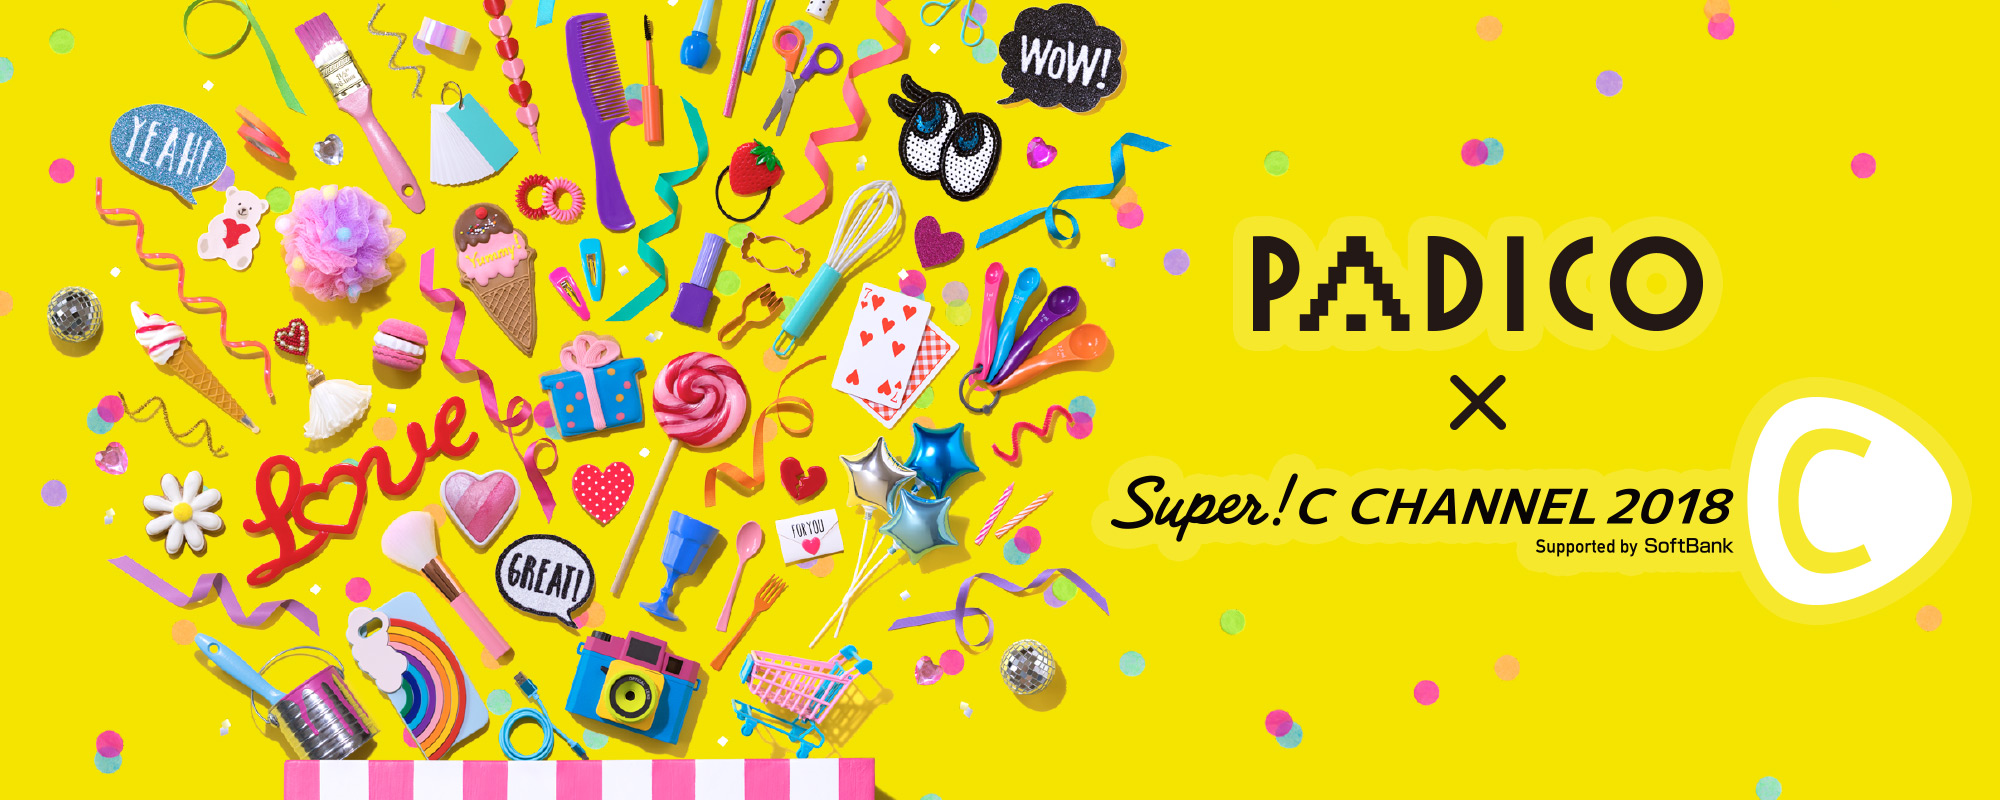 PADICO x Super! C CHANNEL 2018　Supported by SoftBank　2018年10月7日（日）/8日（月・祝） 国際フォーラム ホールE2